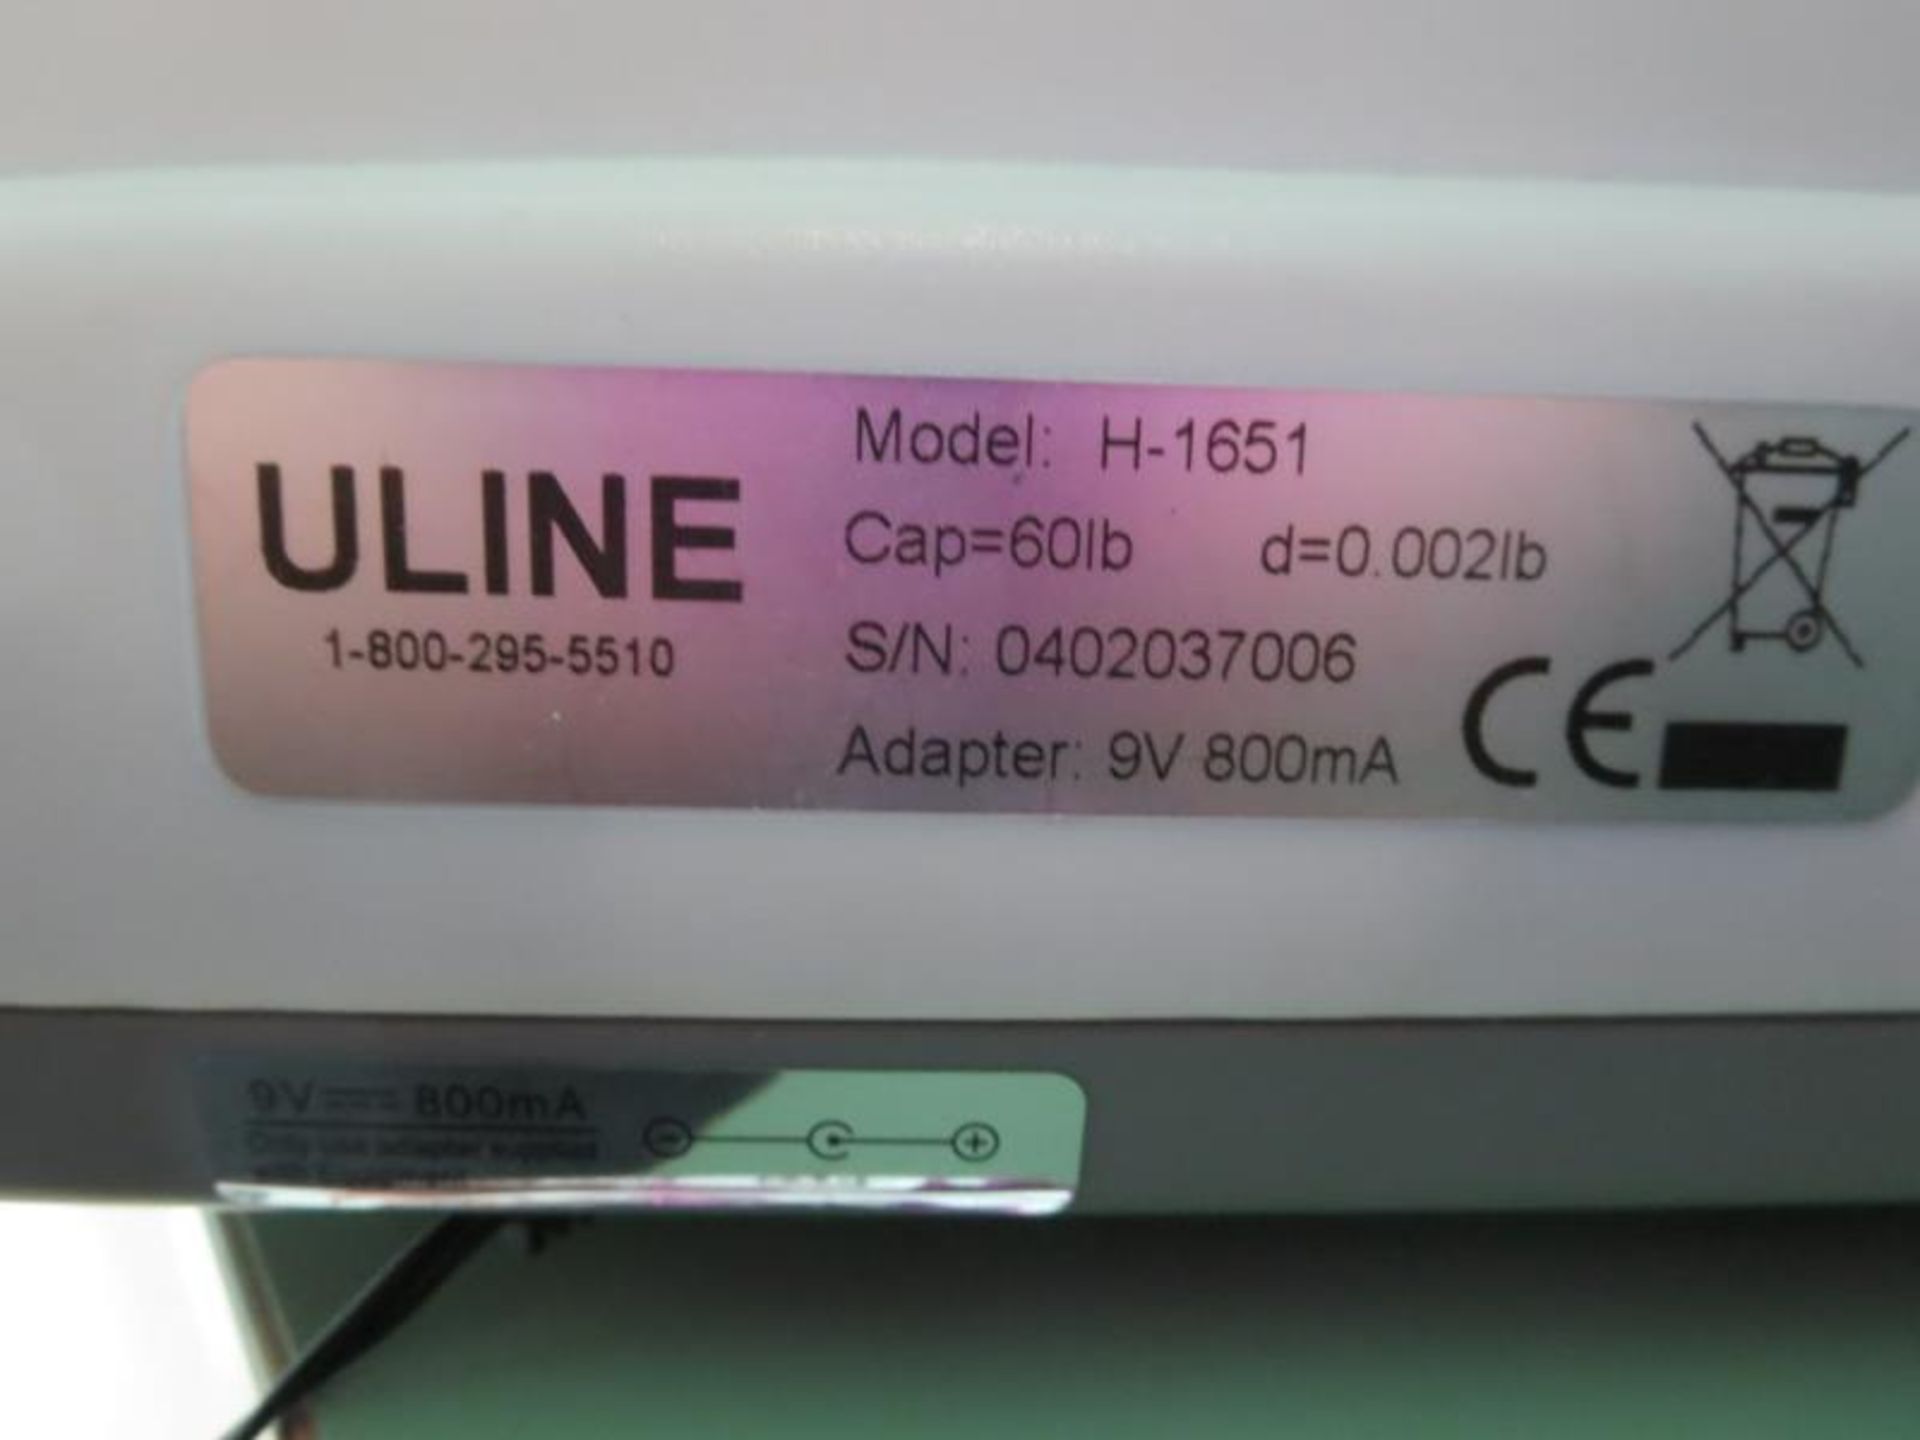 Digital Scale. ULINE H-1651 Digital Scale. Easy-Count Scale - 60 lbs. x .002 lb. Five application - Image 3 of 3